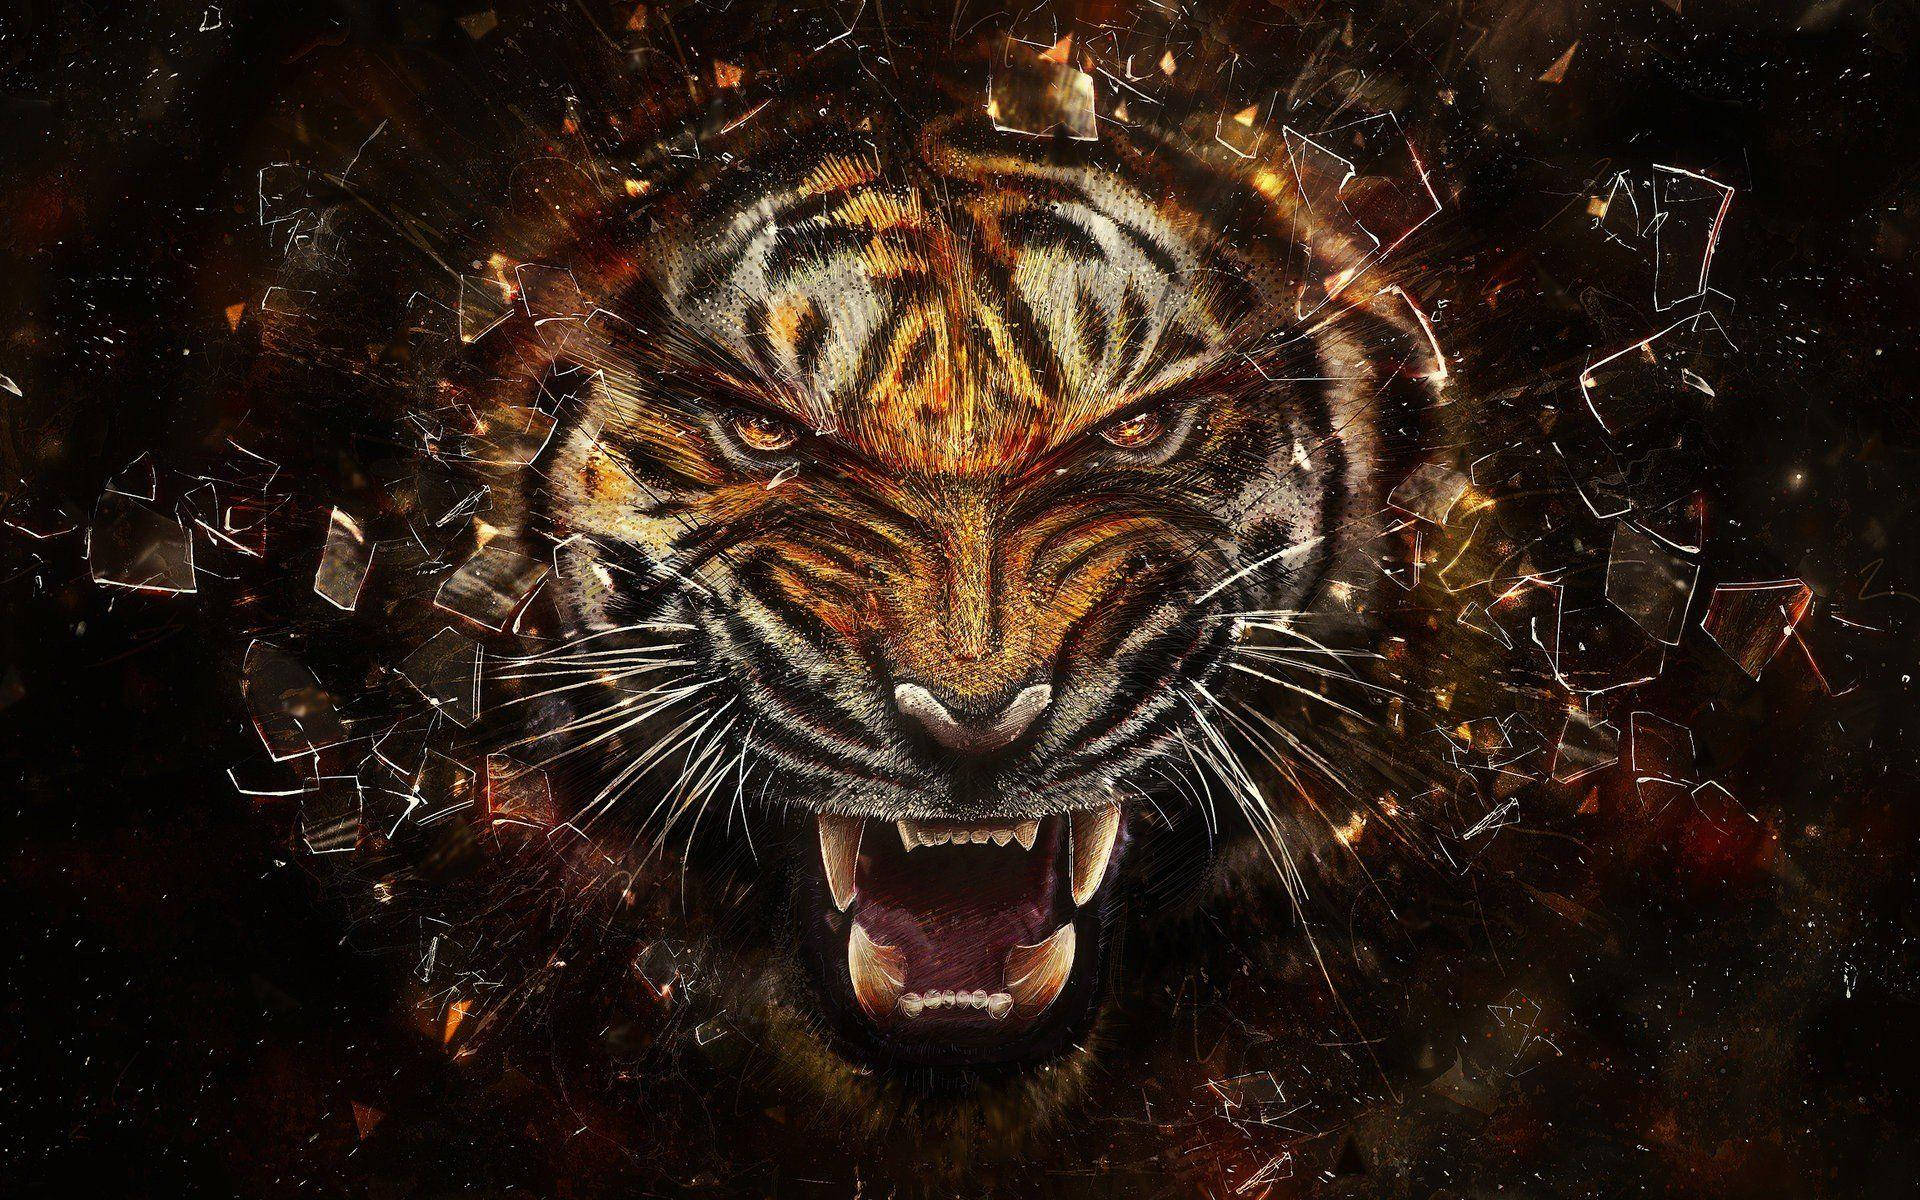 Shattered Angry Tiger Art Wallpaper